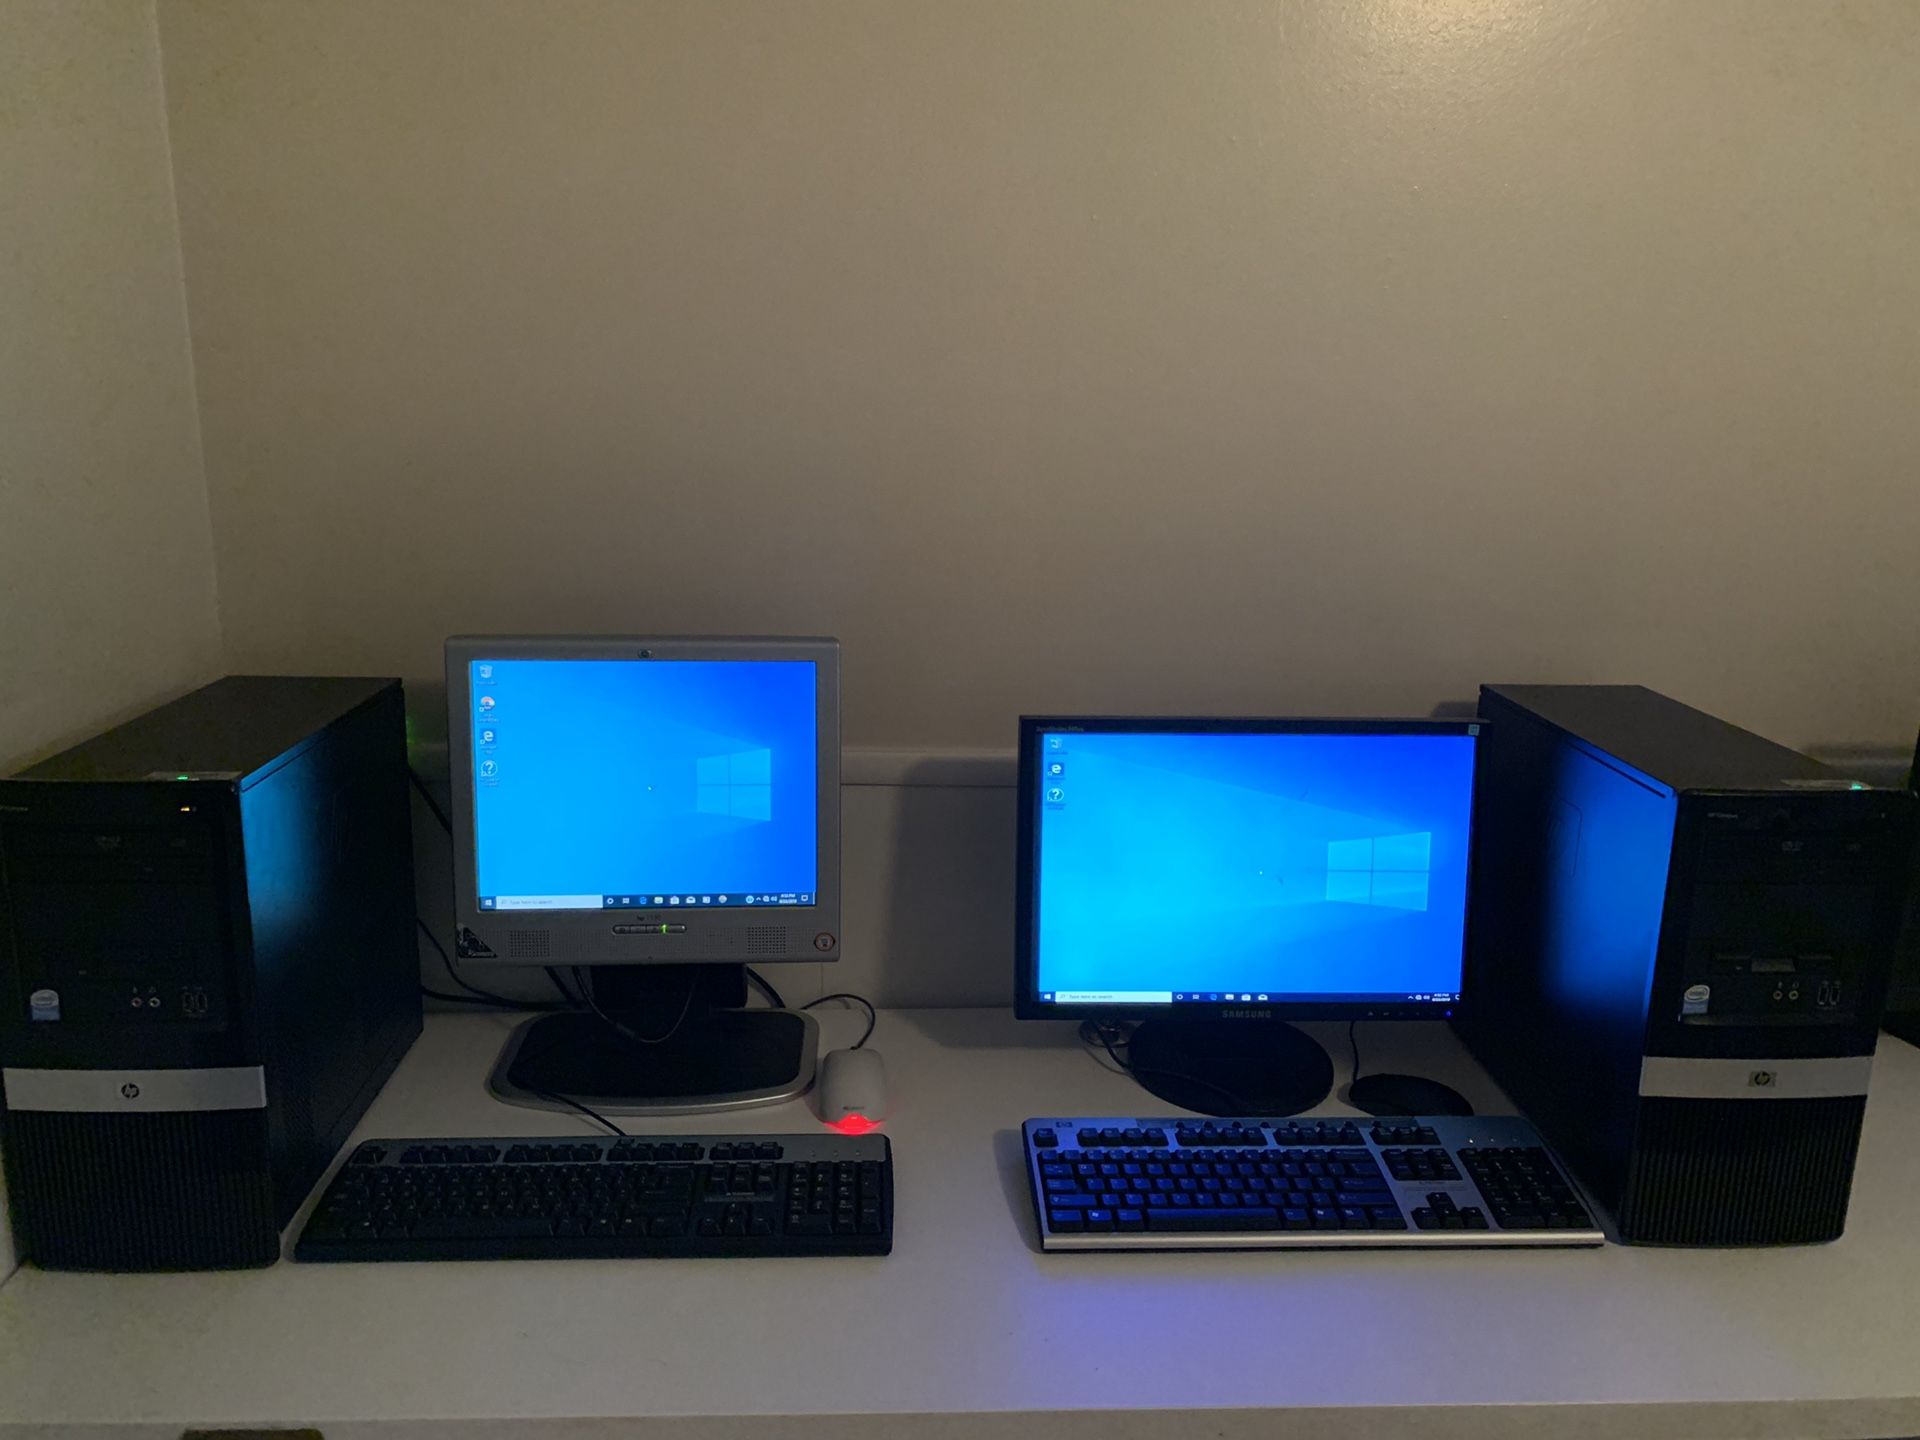 2 Complete Windows 10 Pro Systems